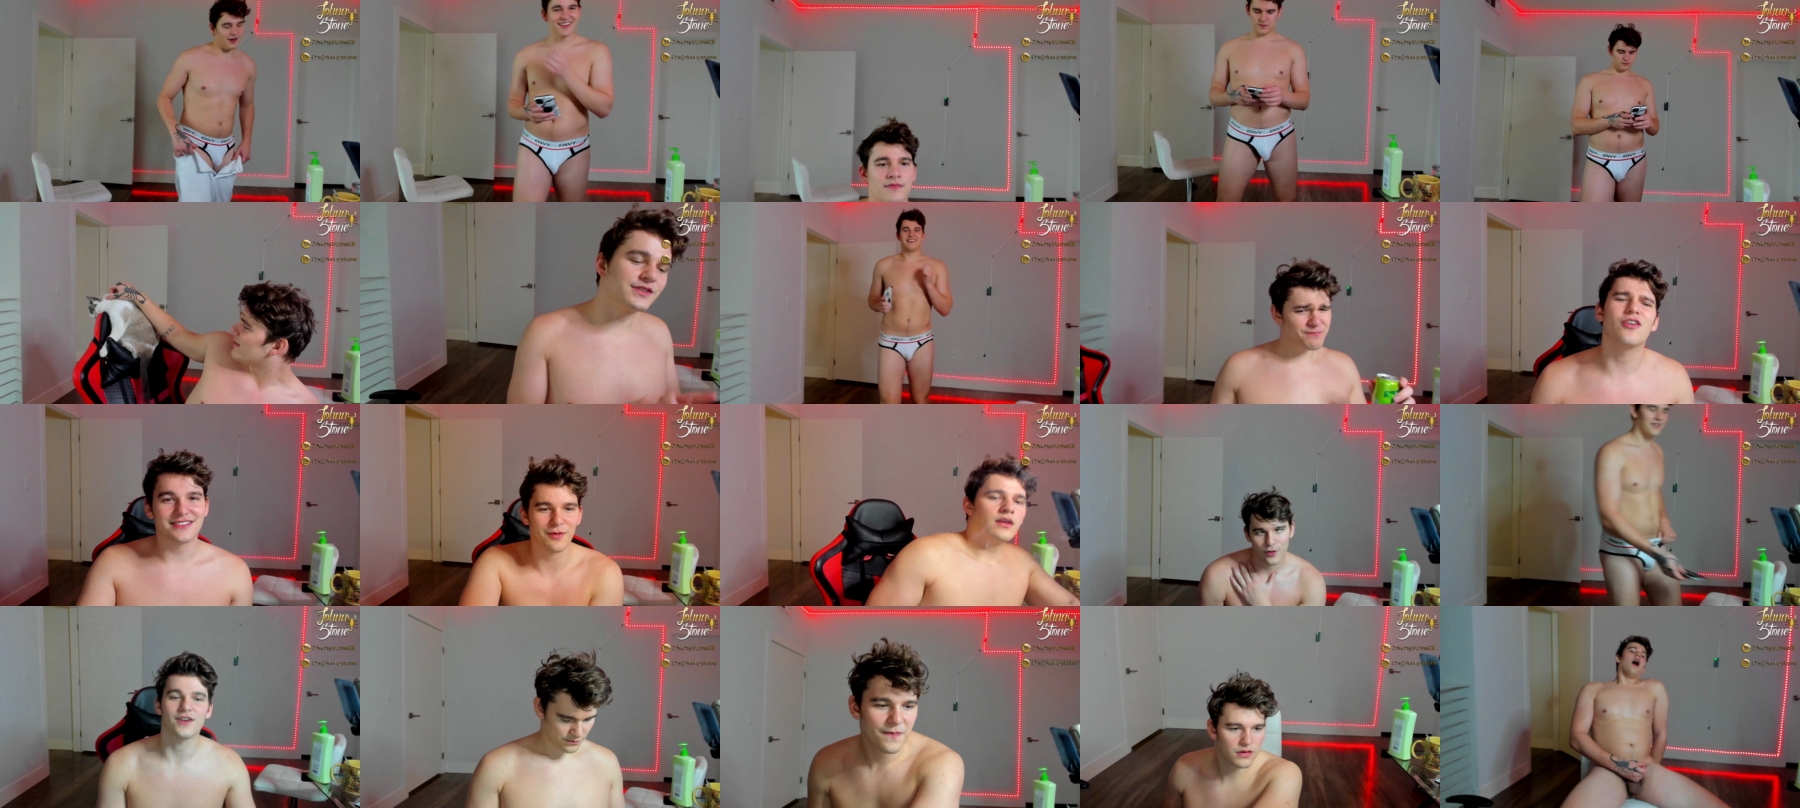 Thejohnnystone  24-07-2021 Male Video